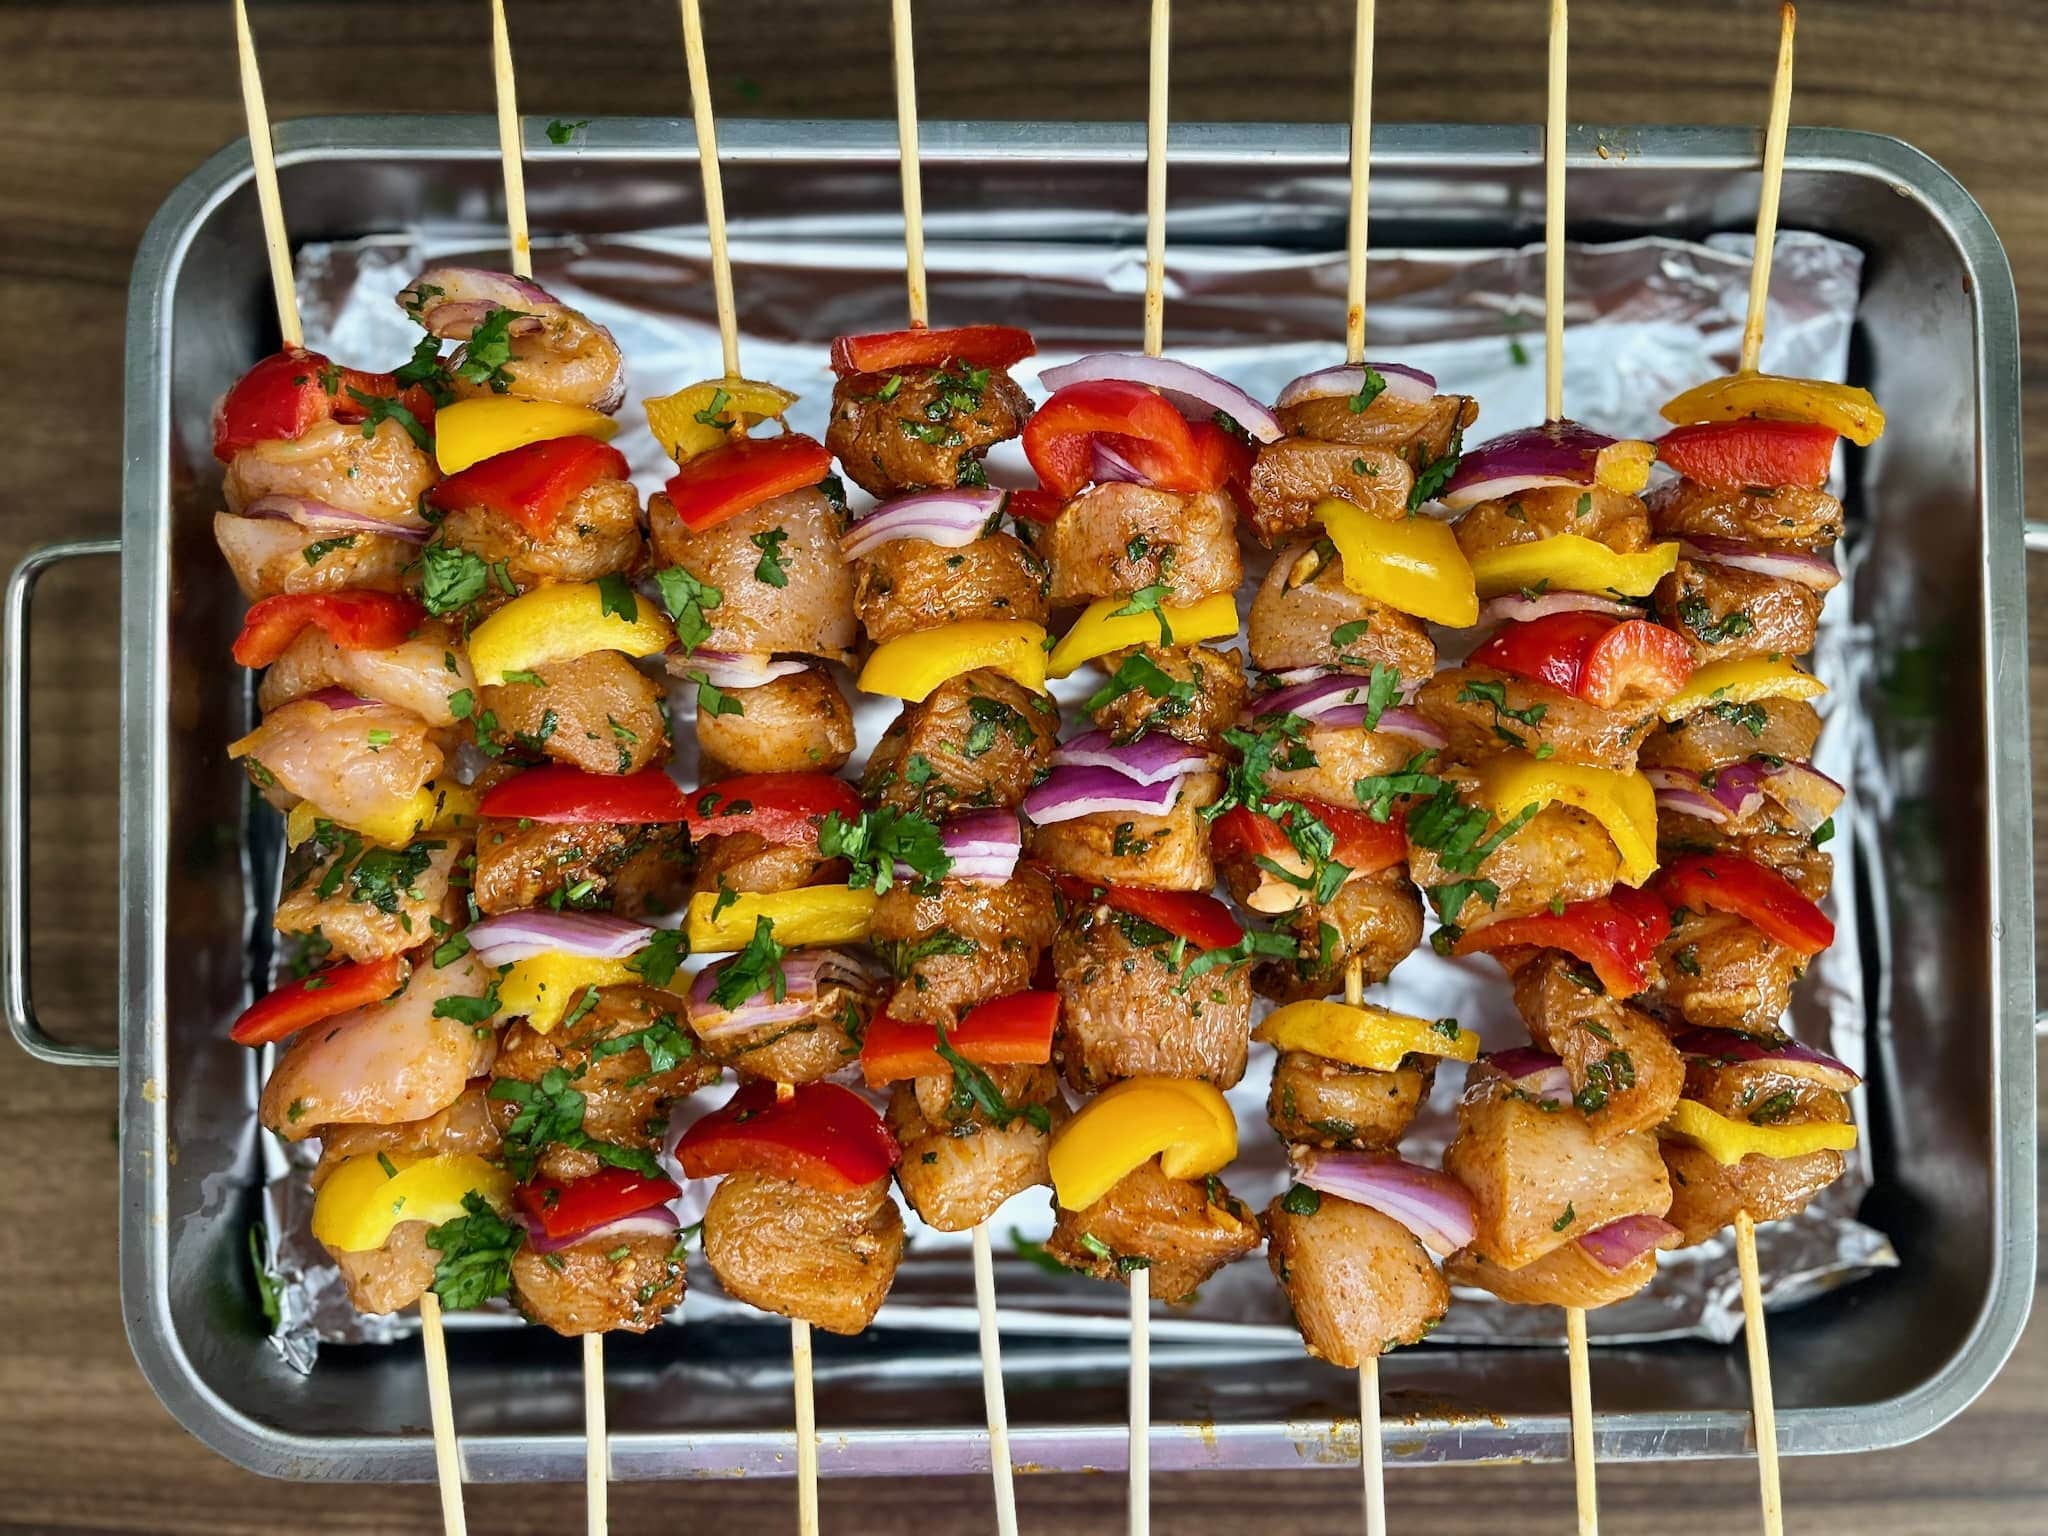 Chicken skewers ready to be baked